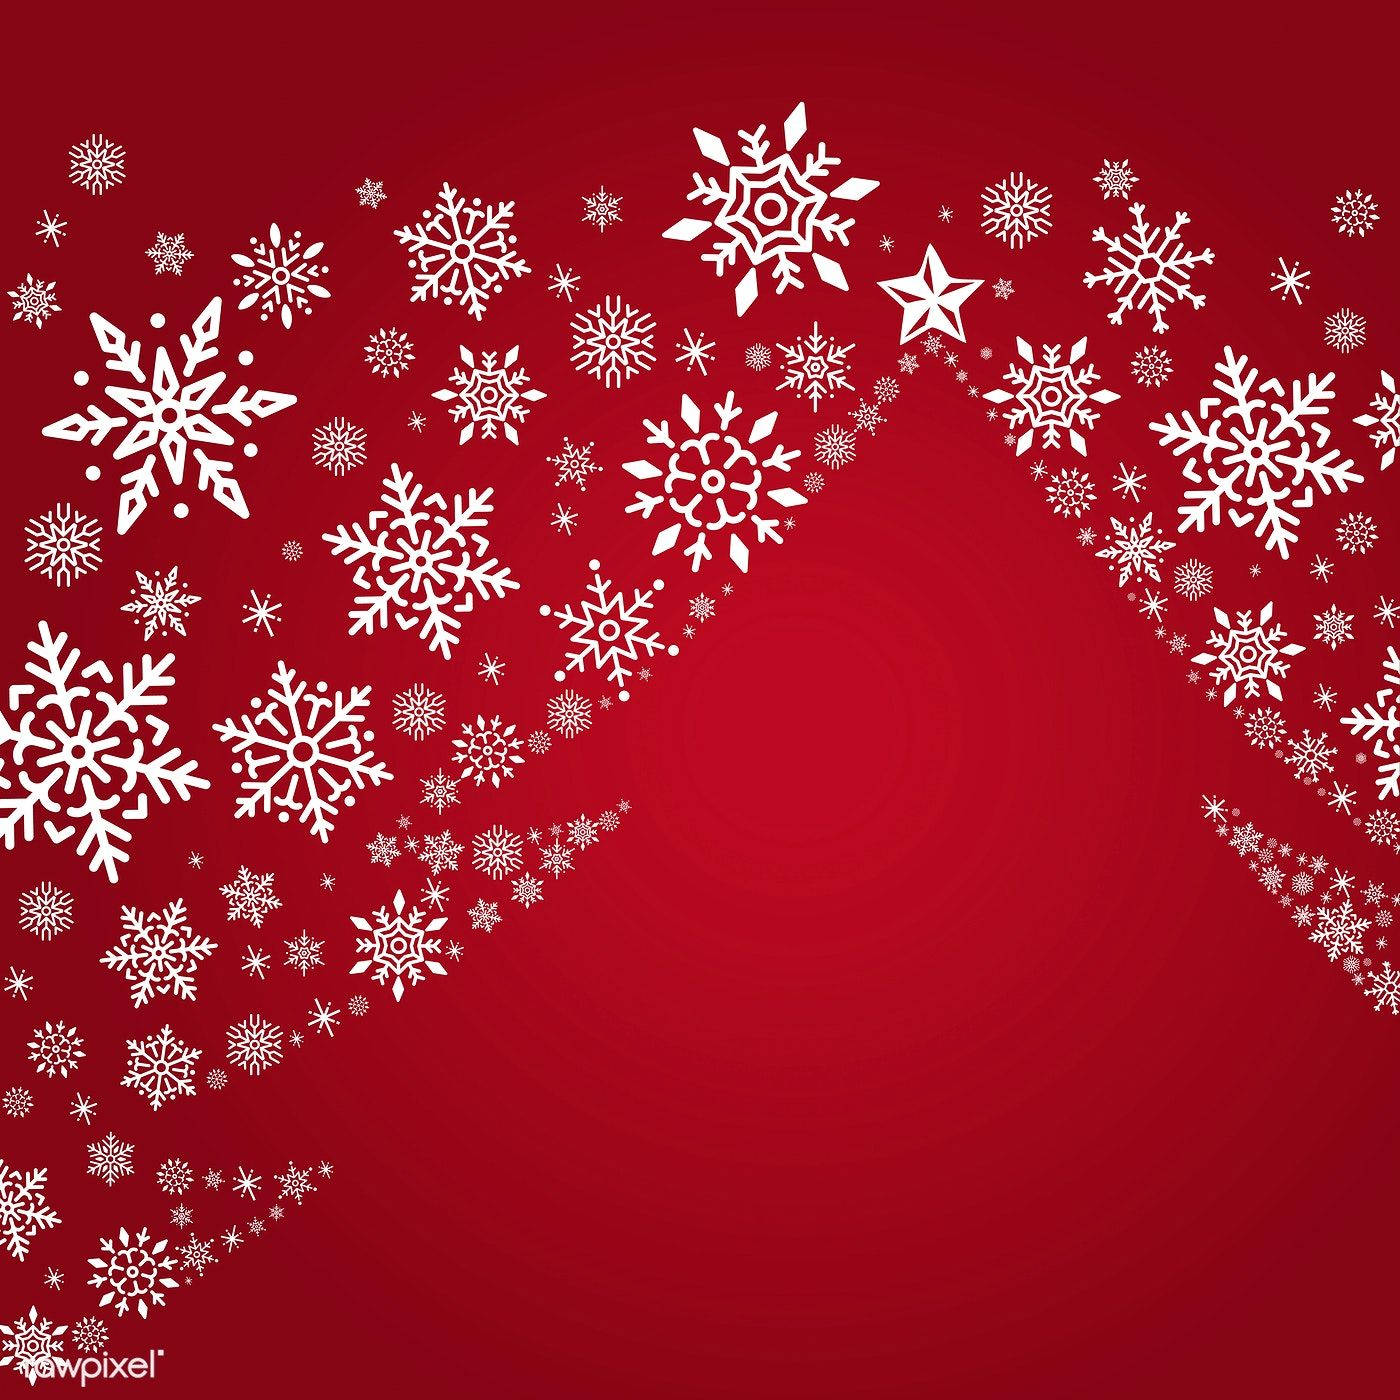 Snowflakes Artwork In Red Christmas Background Wallpaper